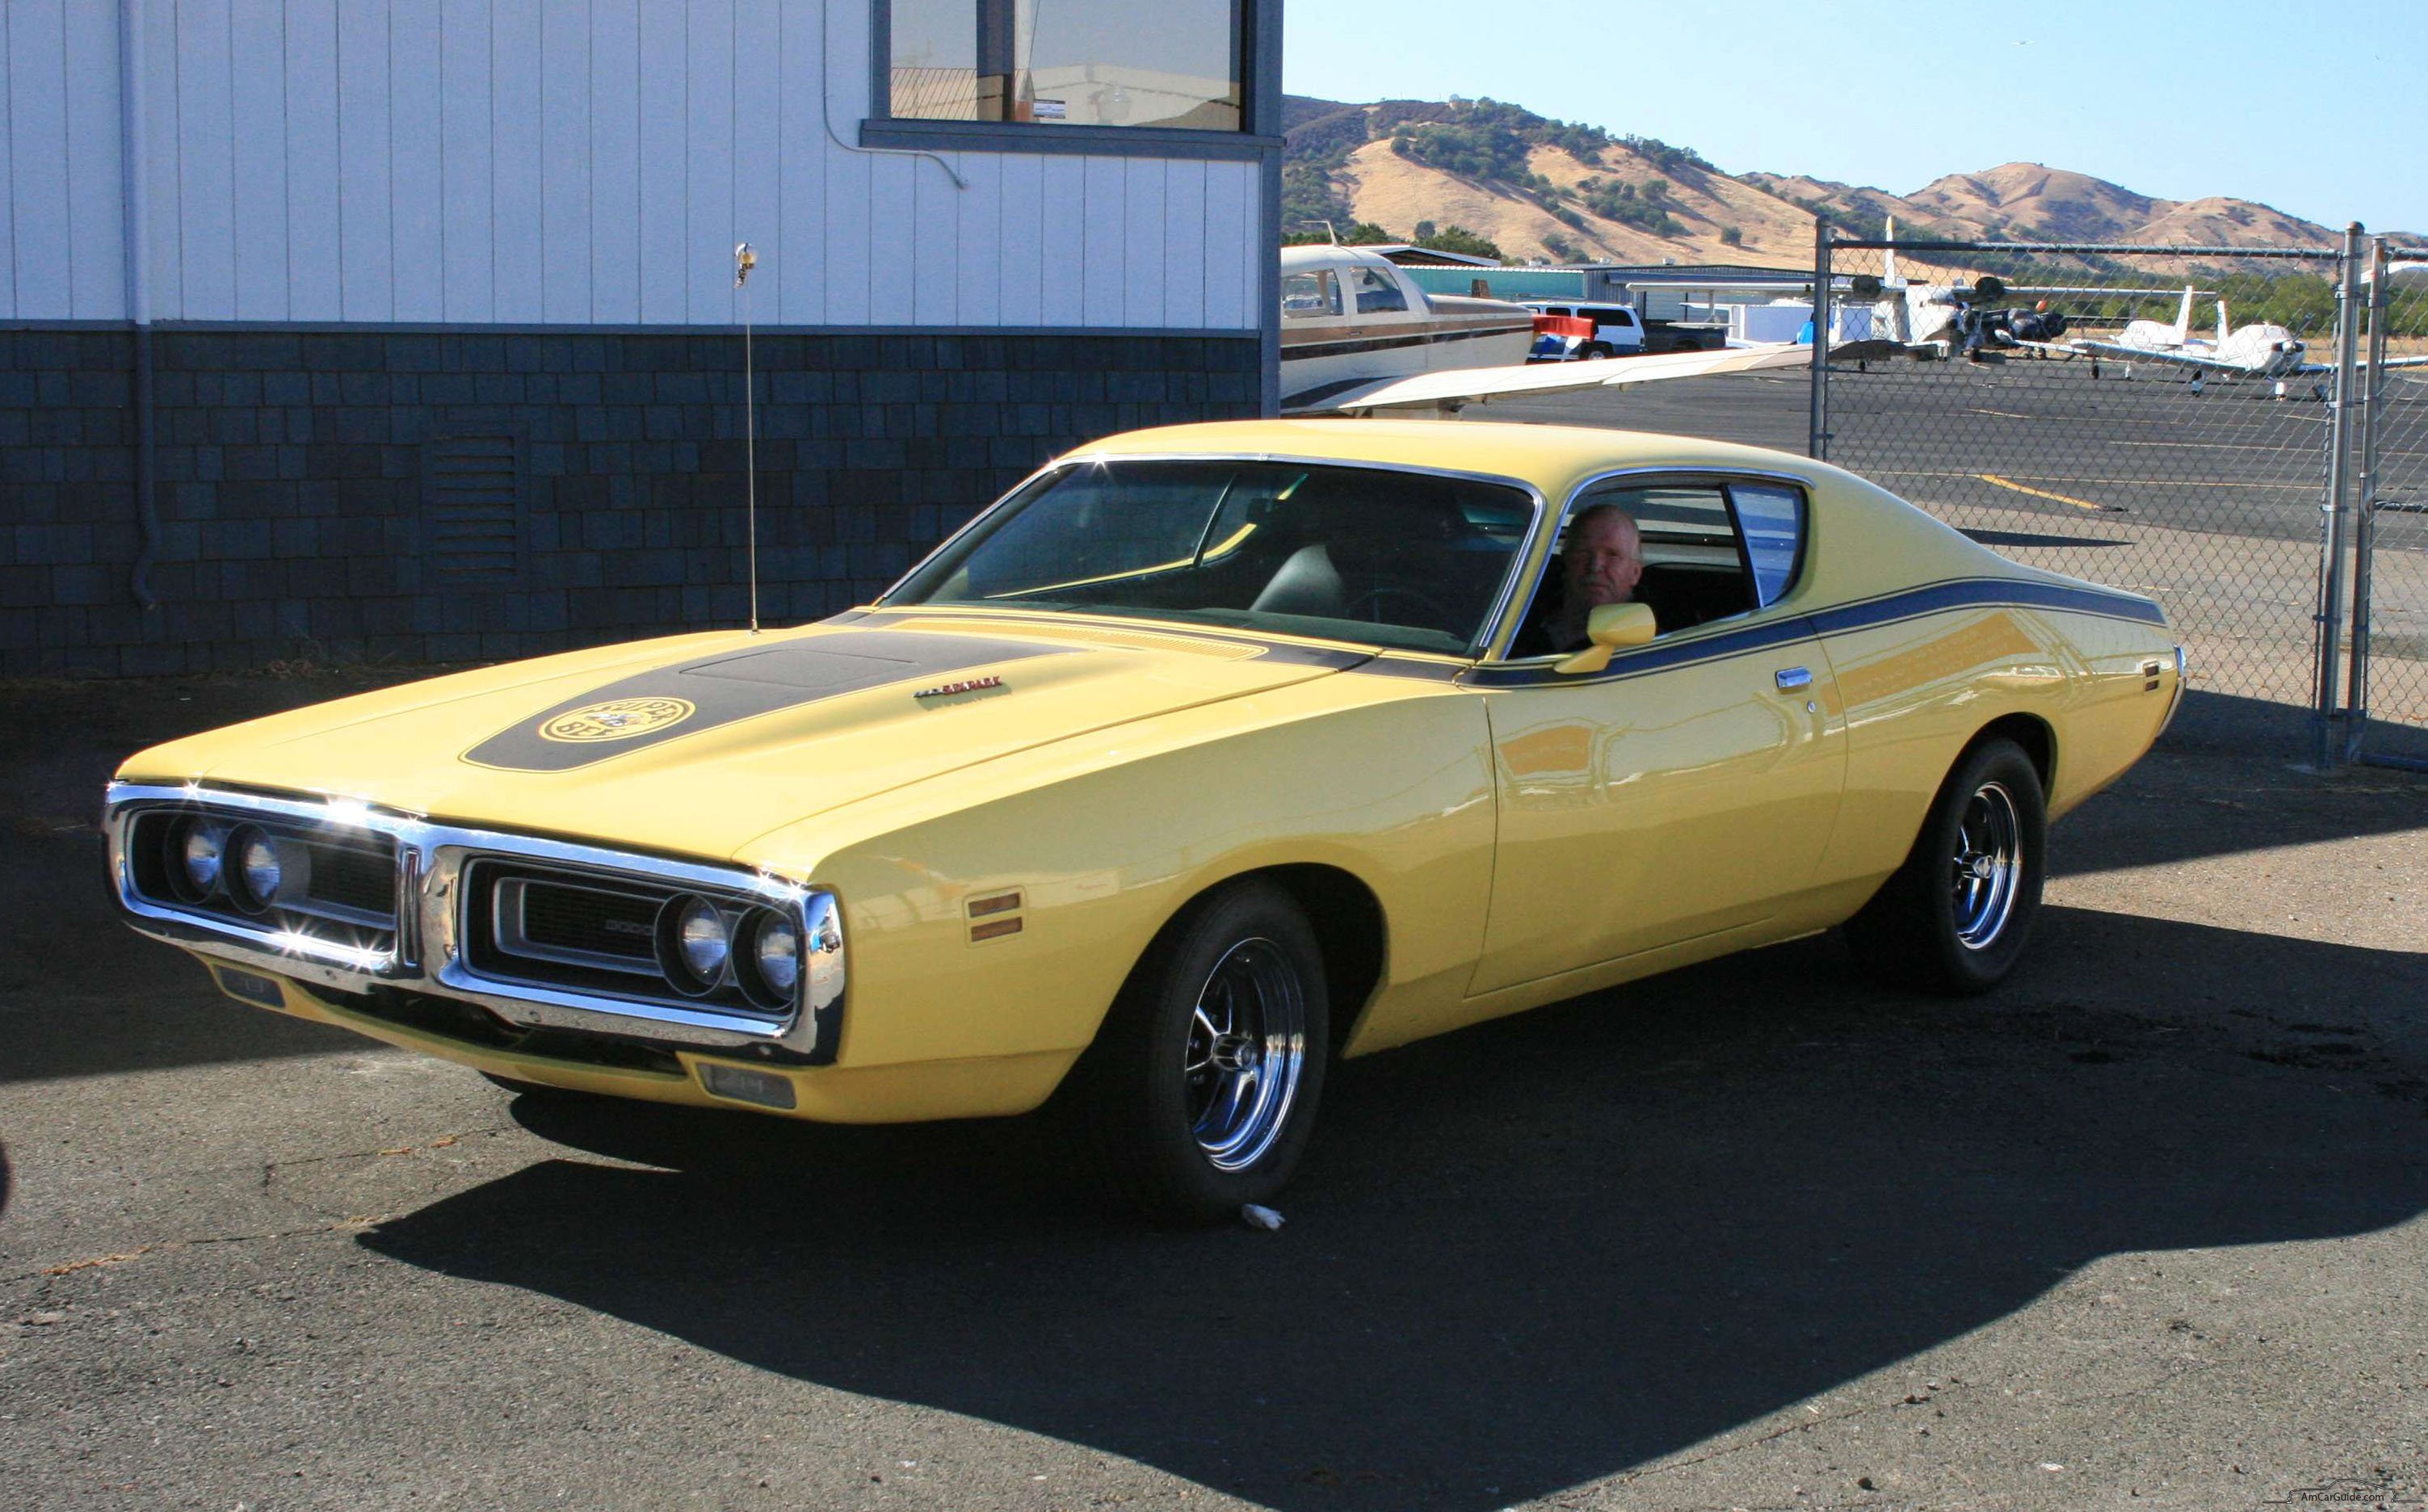 Dodge Chager Super Bee